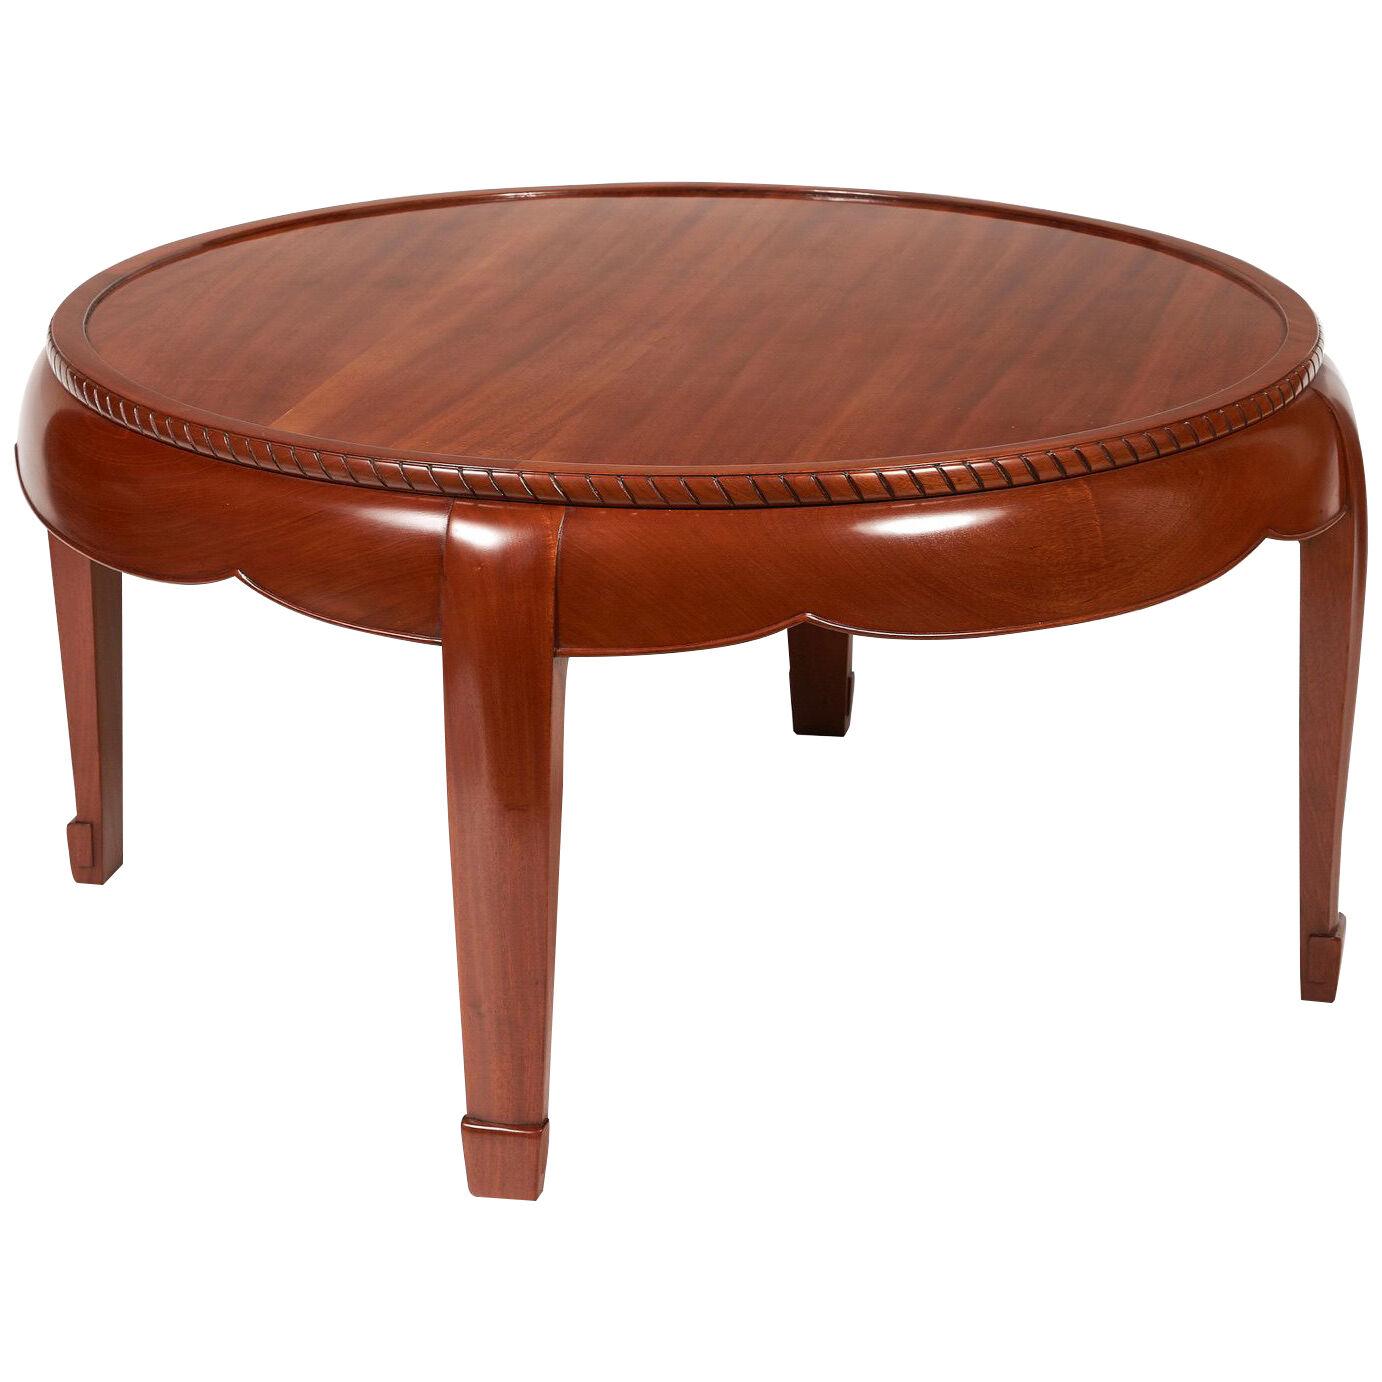 Mahogany Coffee Table by Louis Süe and André Mare, circa 1930